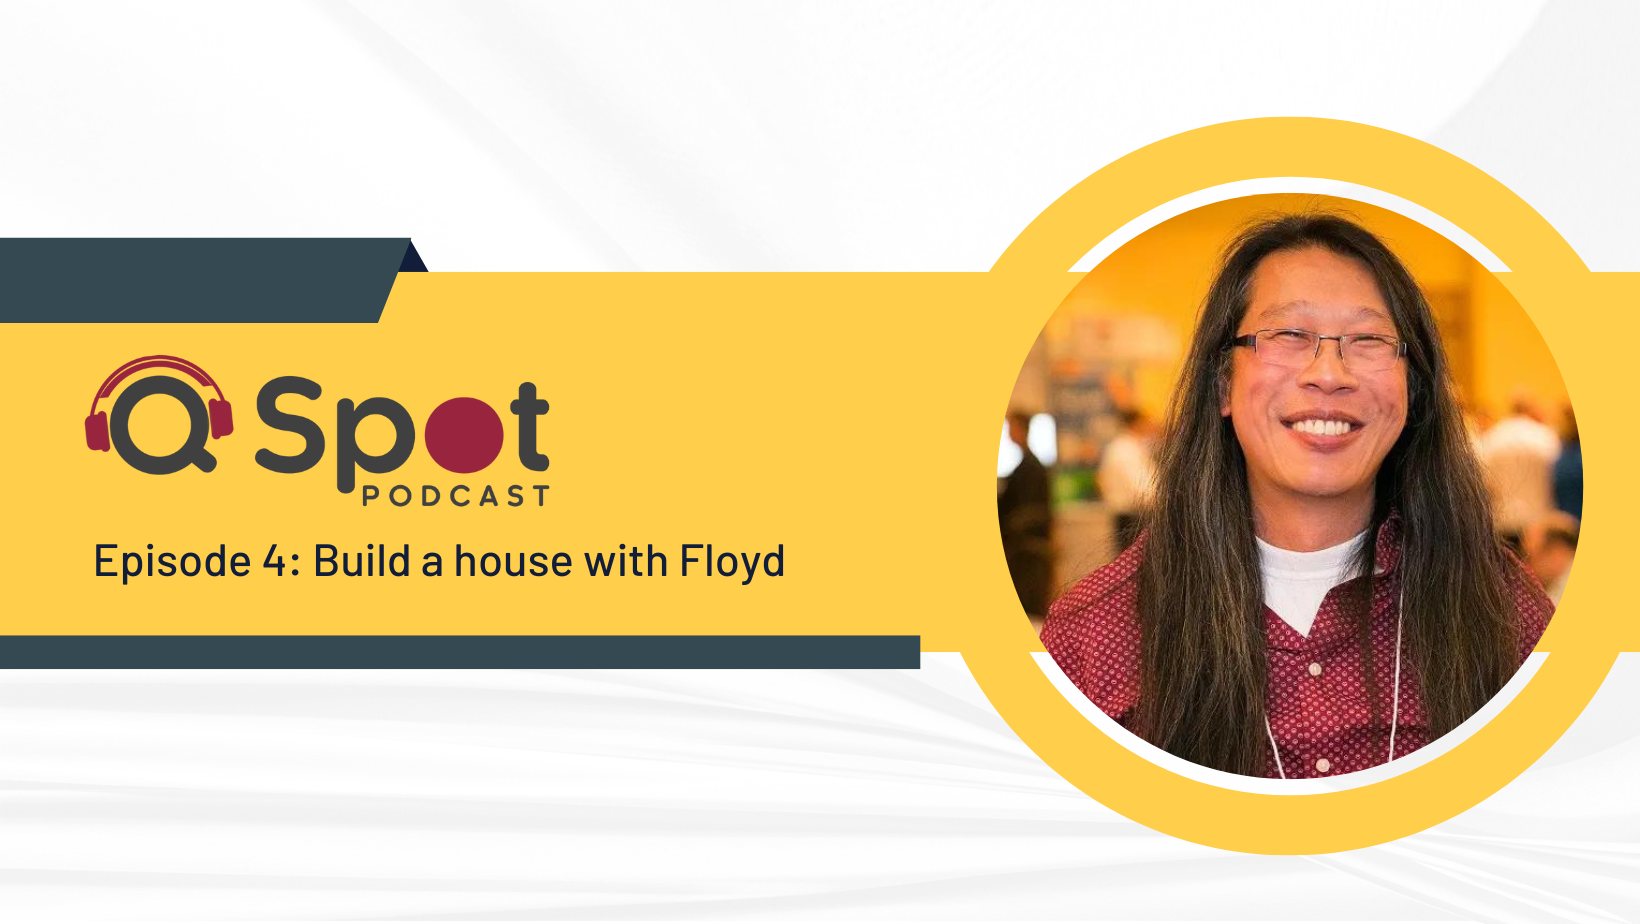 Q Spot Podcast: Episode 4 – Build a House with Floyd